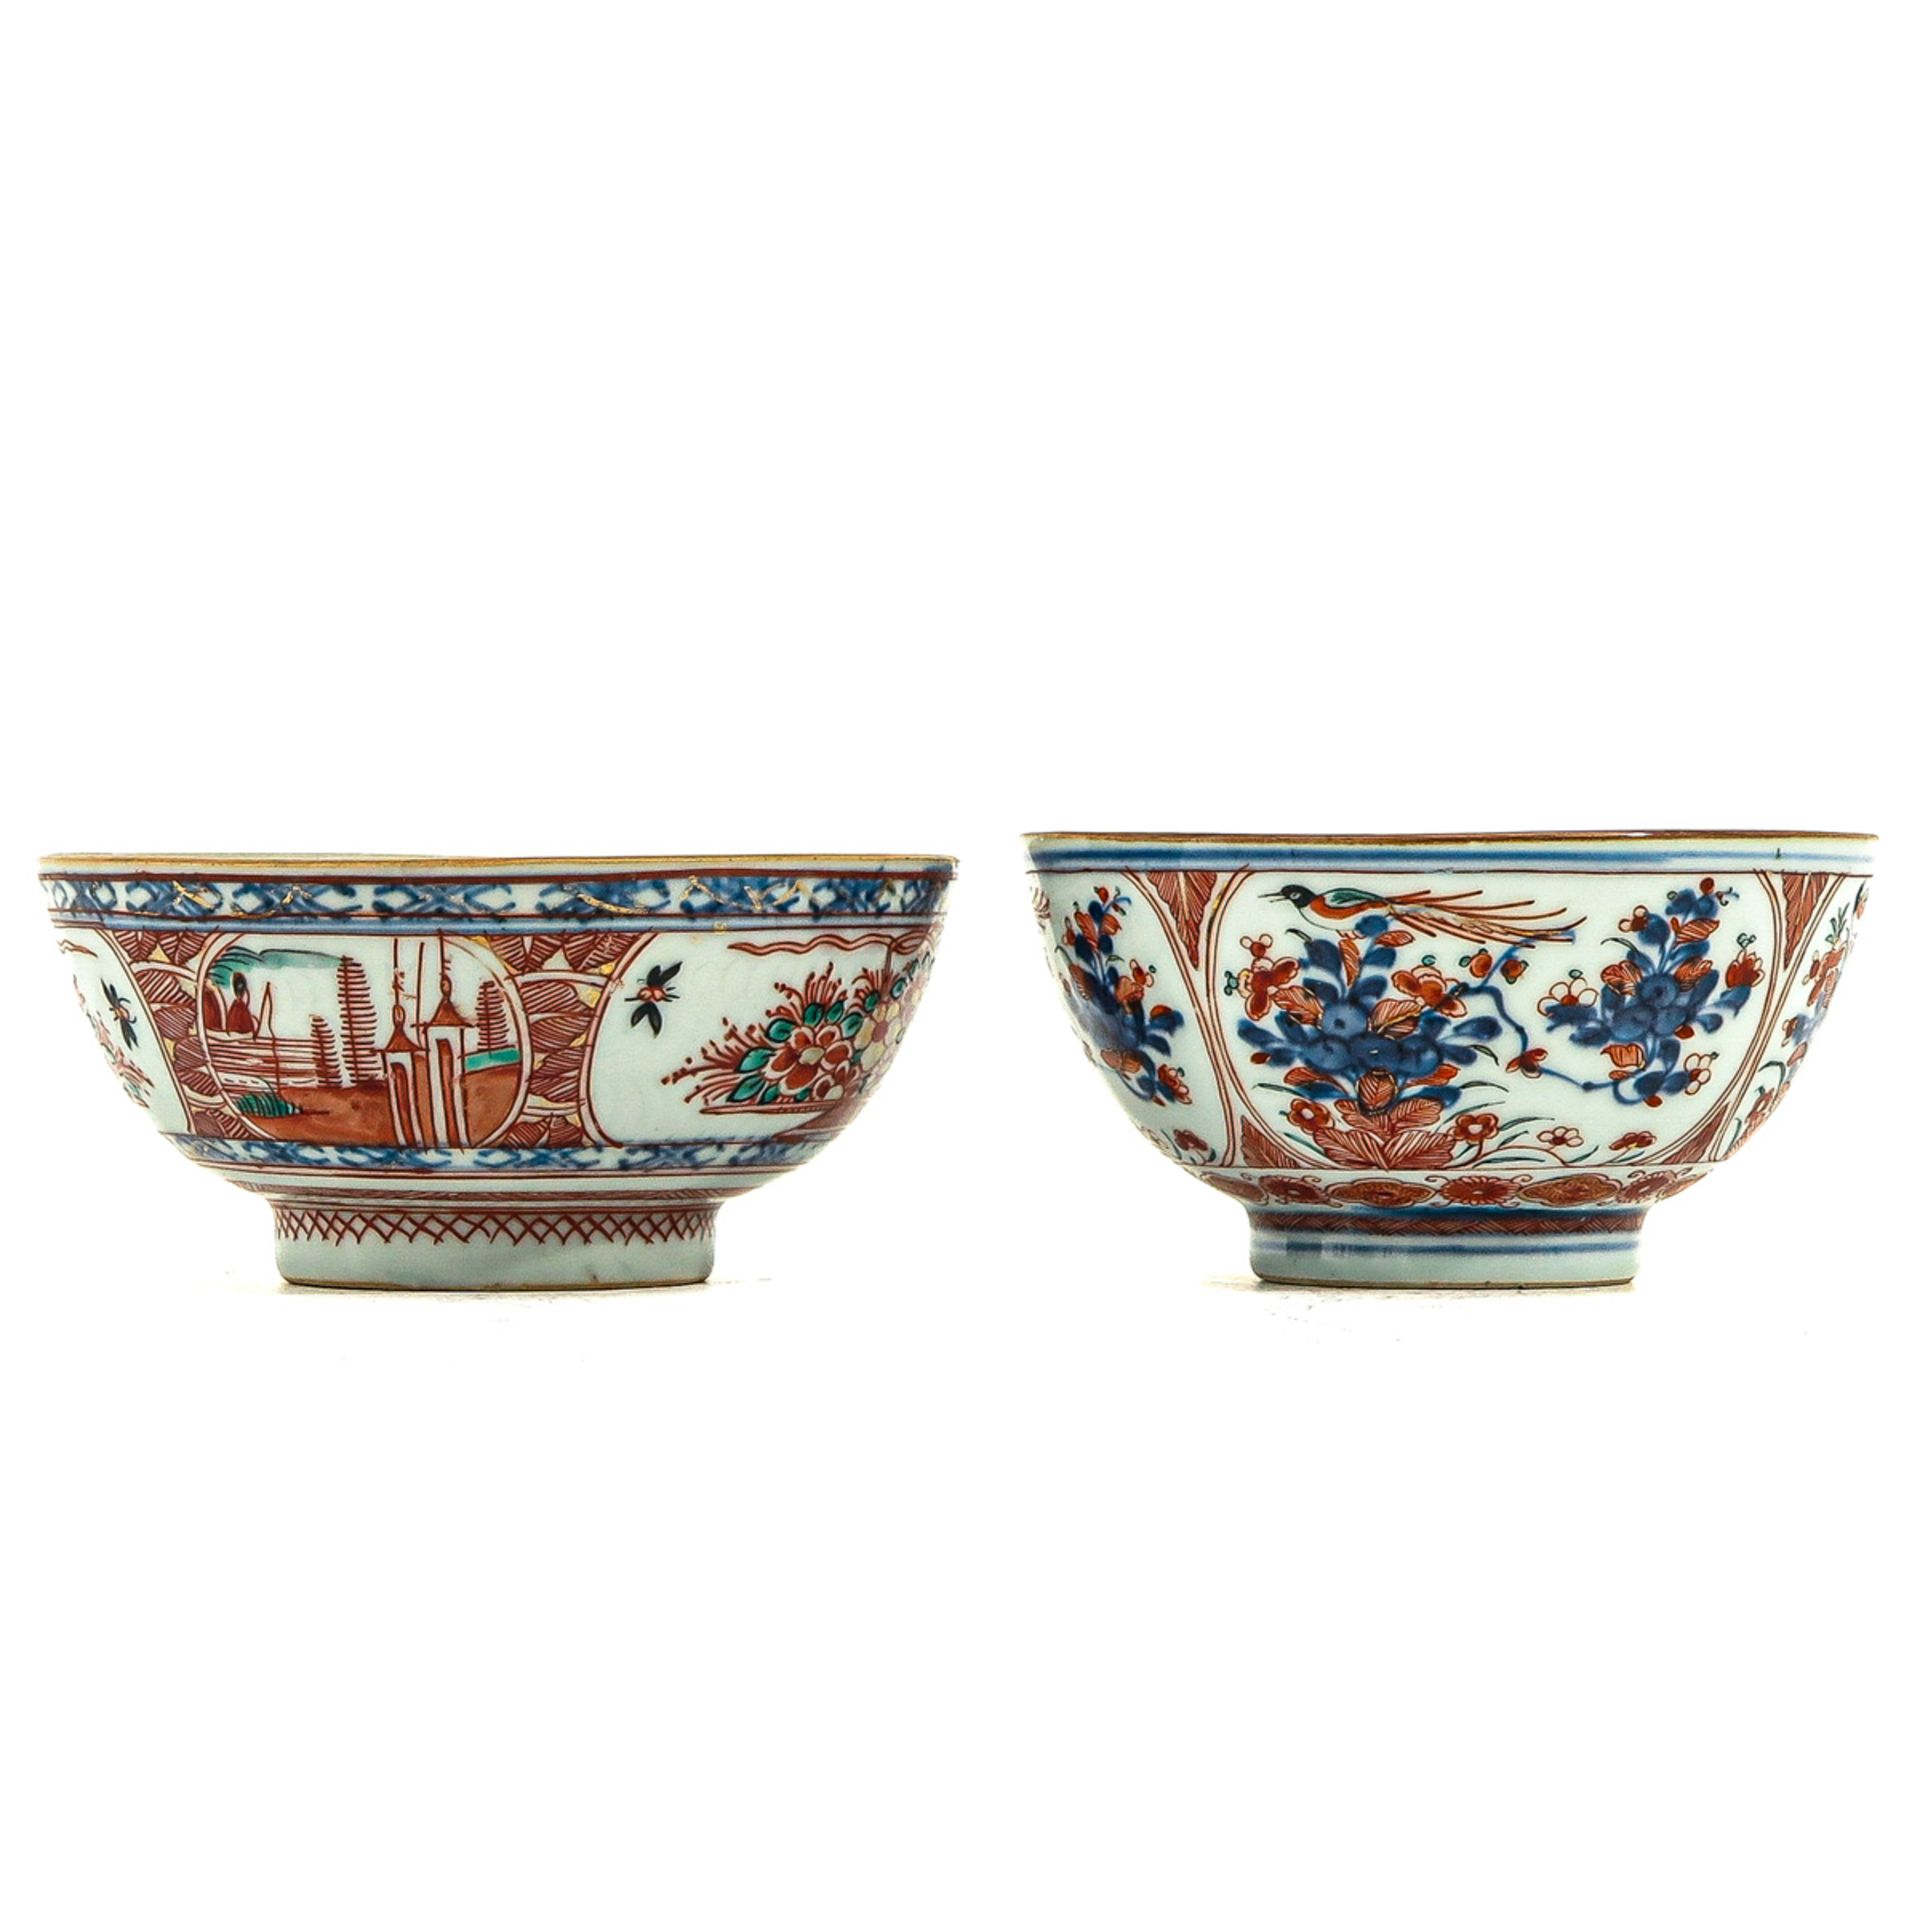 A Lot of 2 Polychrome Bowls - Image 4 of 6